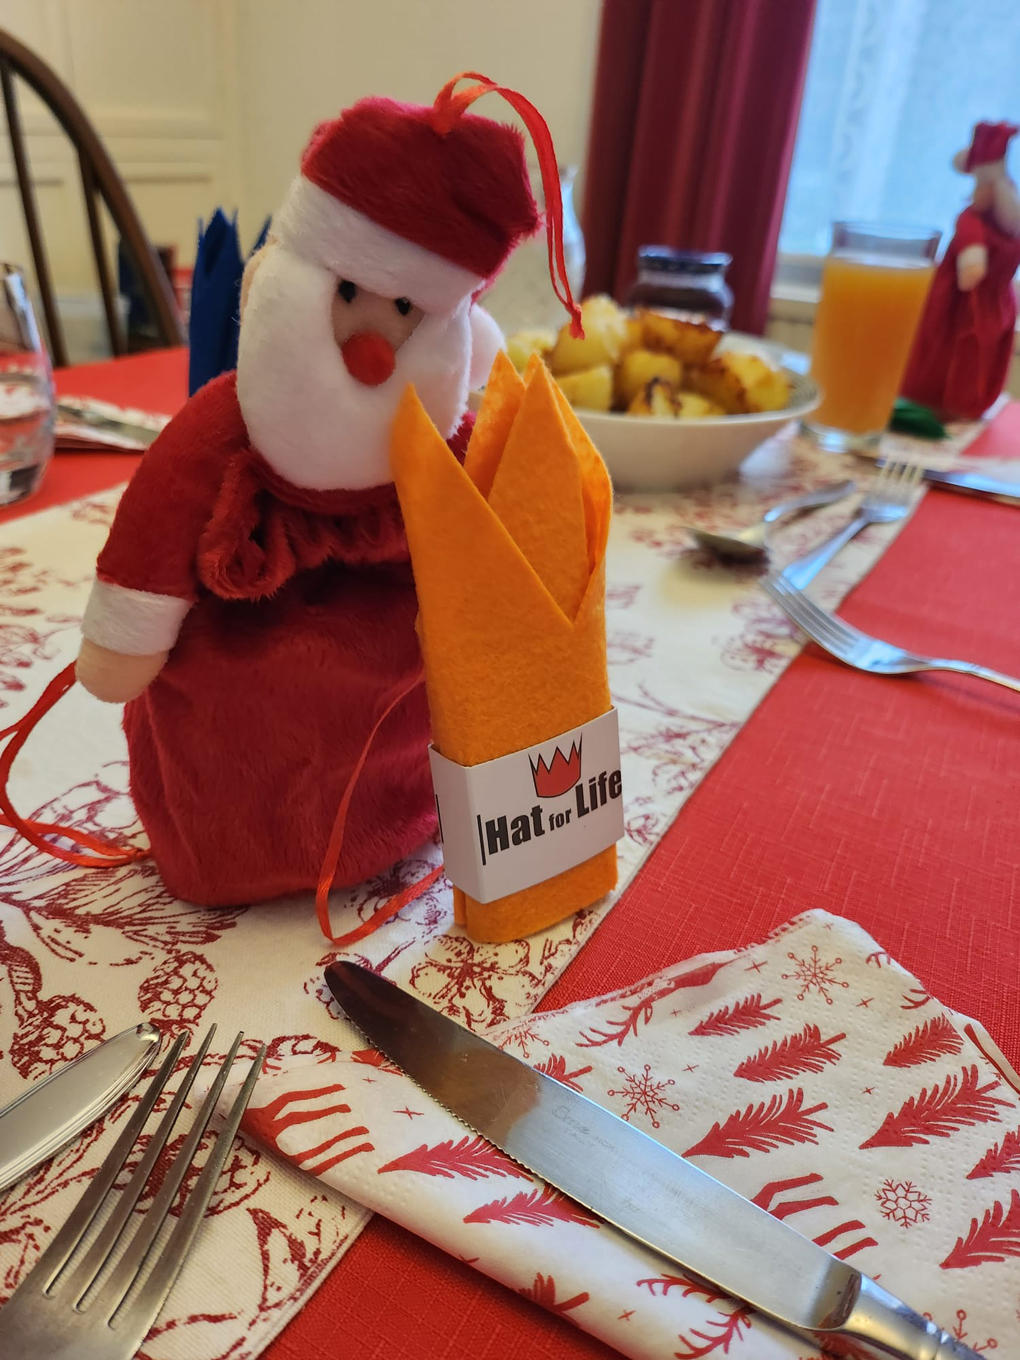 A small santa figure made of fabric sits besides a cloth hat for life Christmas crown. The figure and crown sit on a dining table.